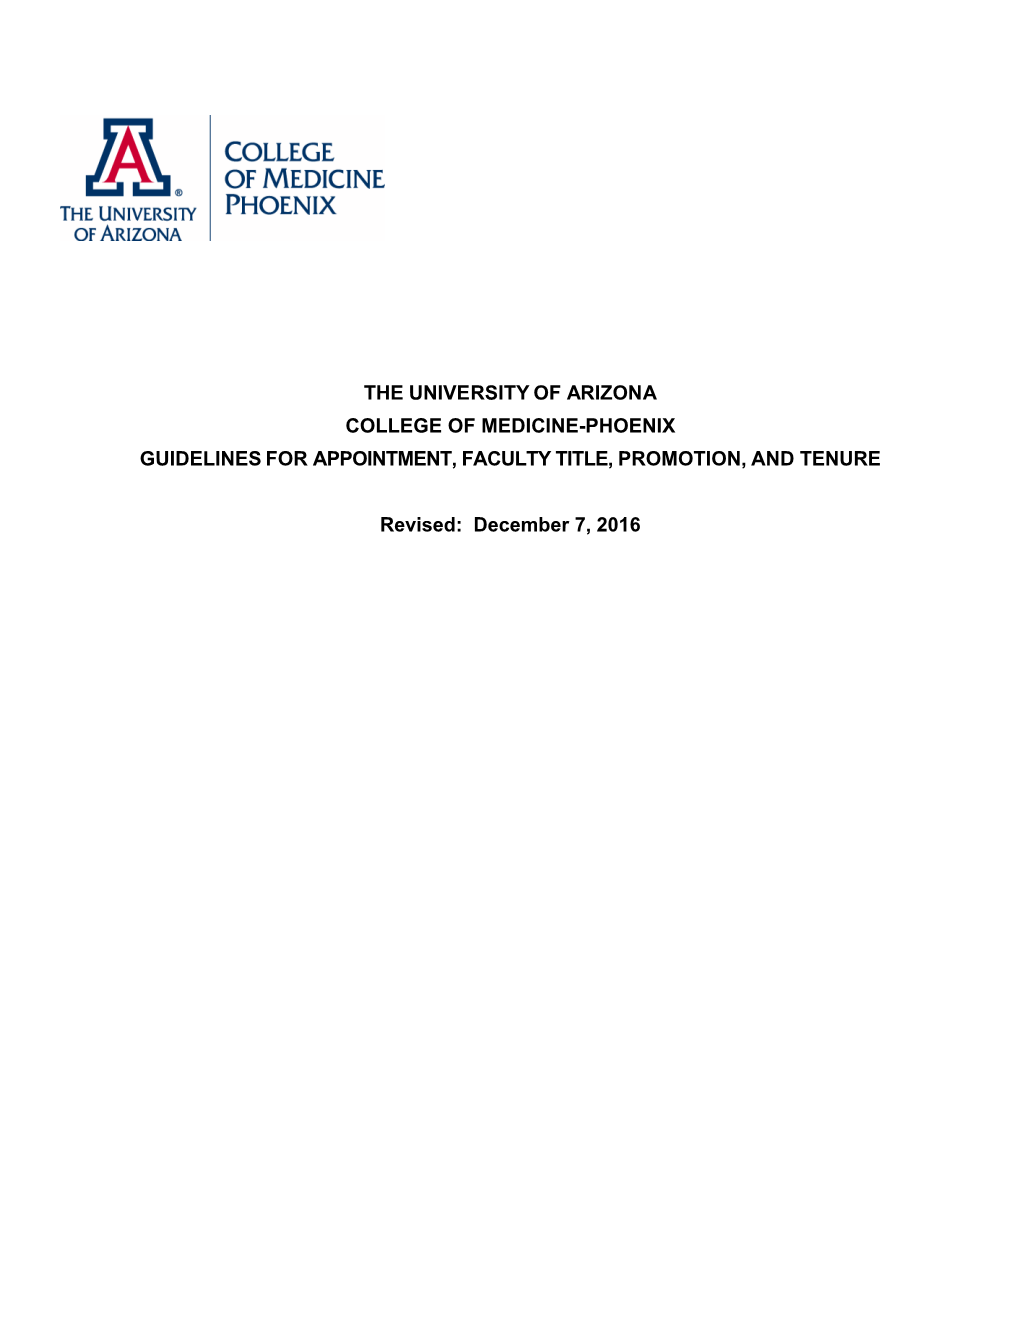 THE UNIVERSITY of ARIZONA COLLEGE of MEDICINE-PHOENIX GUIDELINES for APPOINTMENT, FACULTY TITLE, PROMOTION, and TENURE Revised